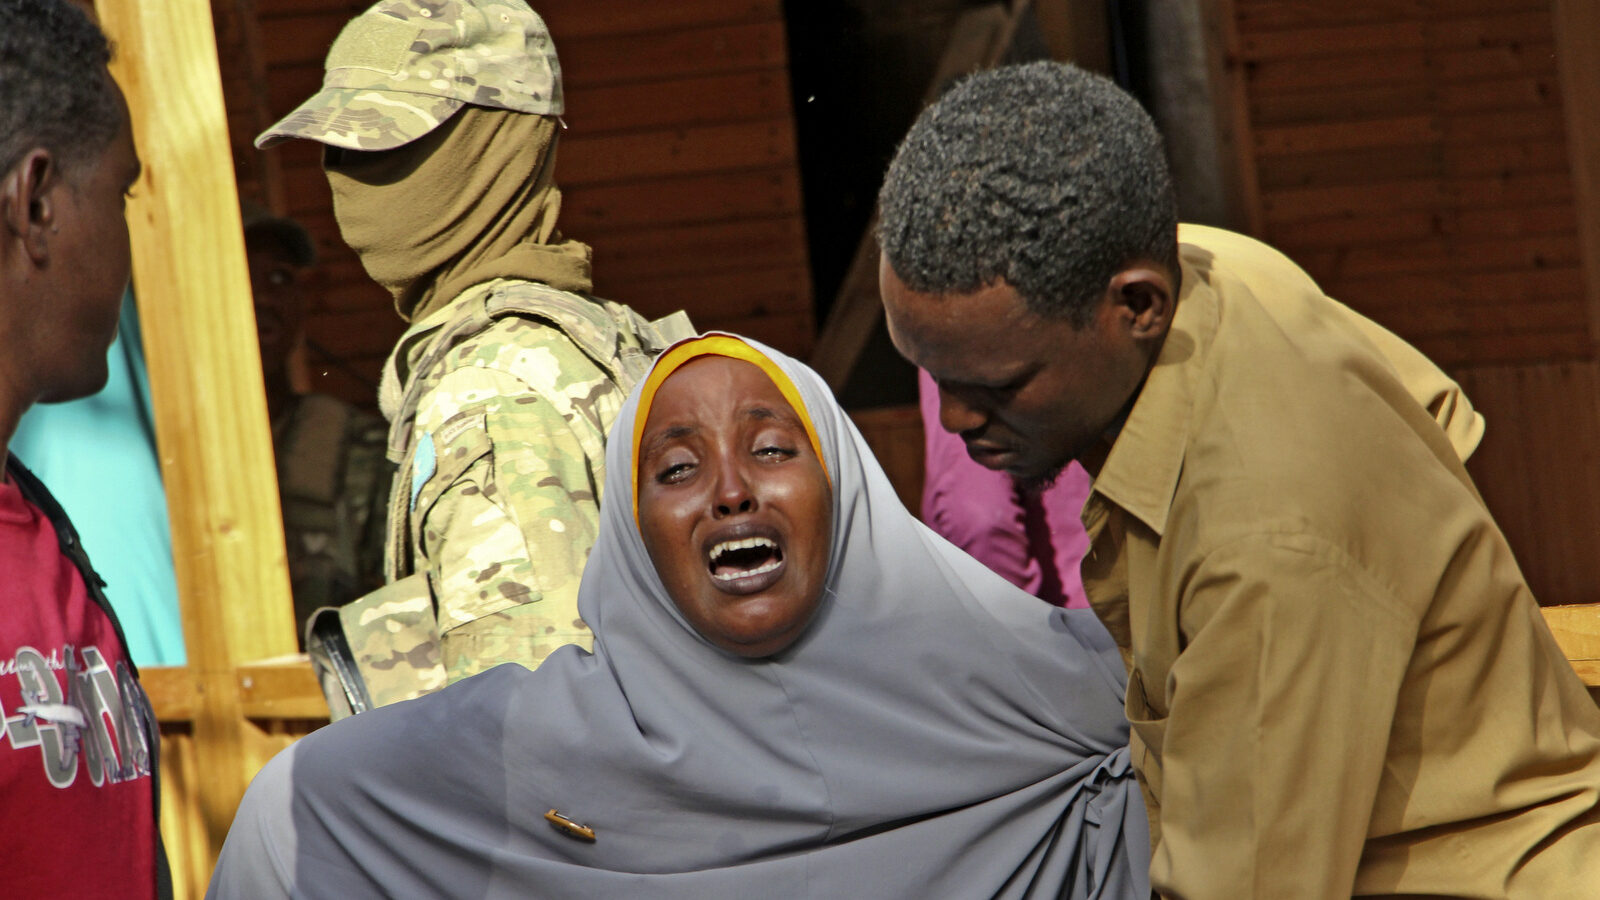 A mother whose daughter was shot in the head by attackers during a militant attack on a restaurant, grieves in Mogadishu, Somalia Thursday, June 15, 2017. Somalia's security forces early Thursday morning ended a night-long siege by the terrorist group al-Shabab at the popular "Pizza House" restaurant in the capital. (AP/Farah Abdi Warsameh)